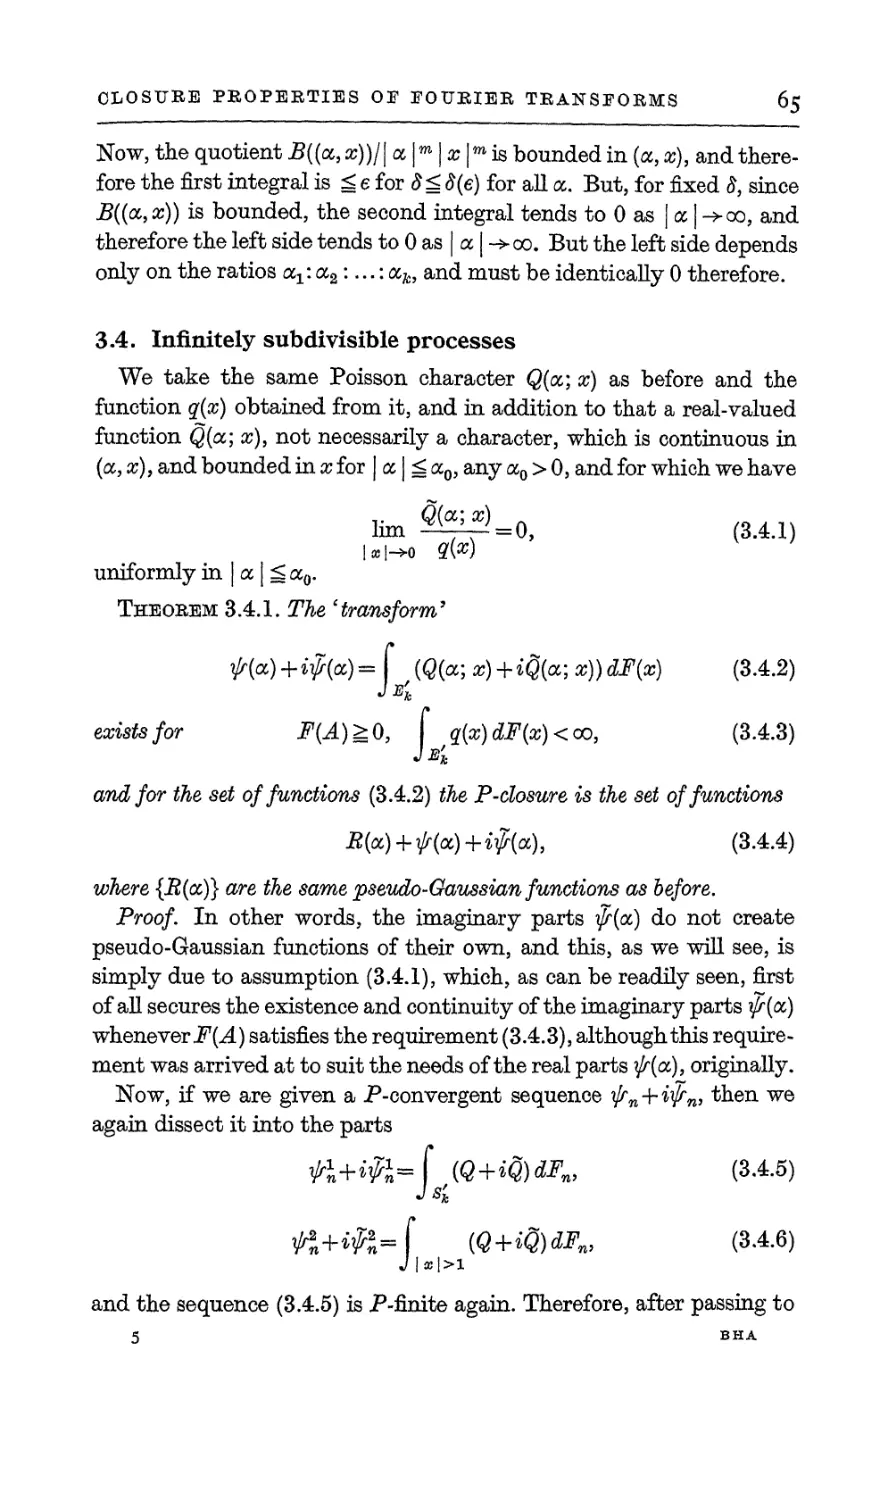 3.4. Infinitely subdivisible processes